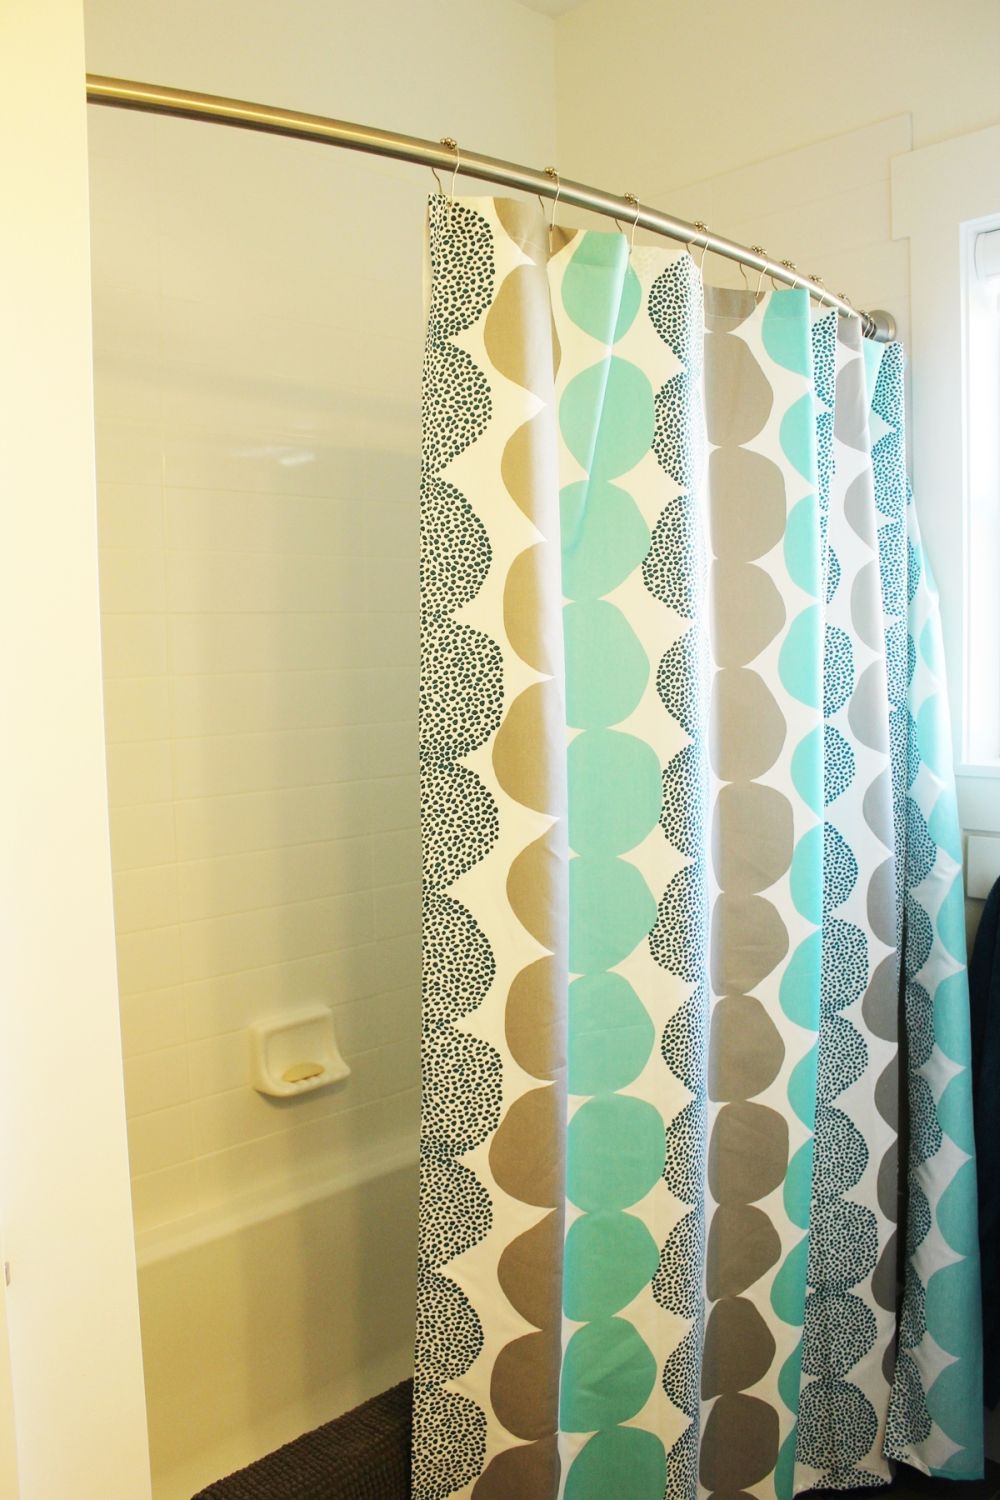 Decorating a narro bathroom by changing the shower curtain